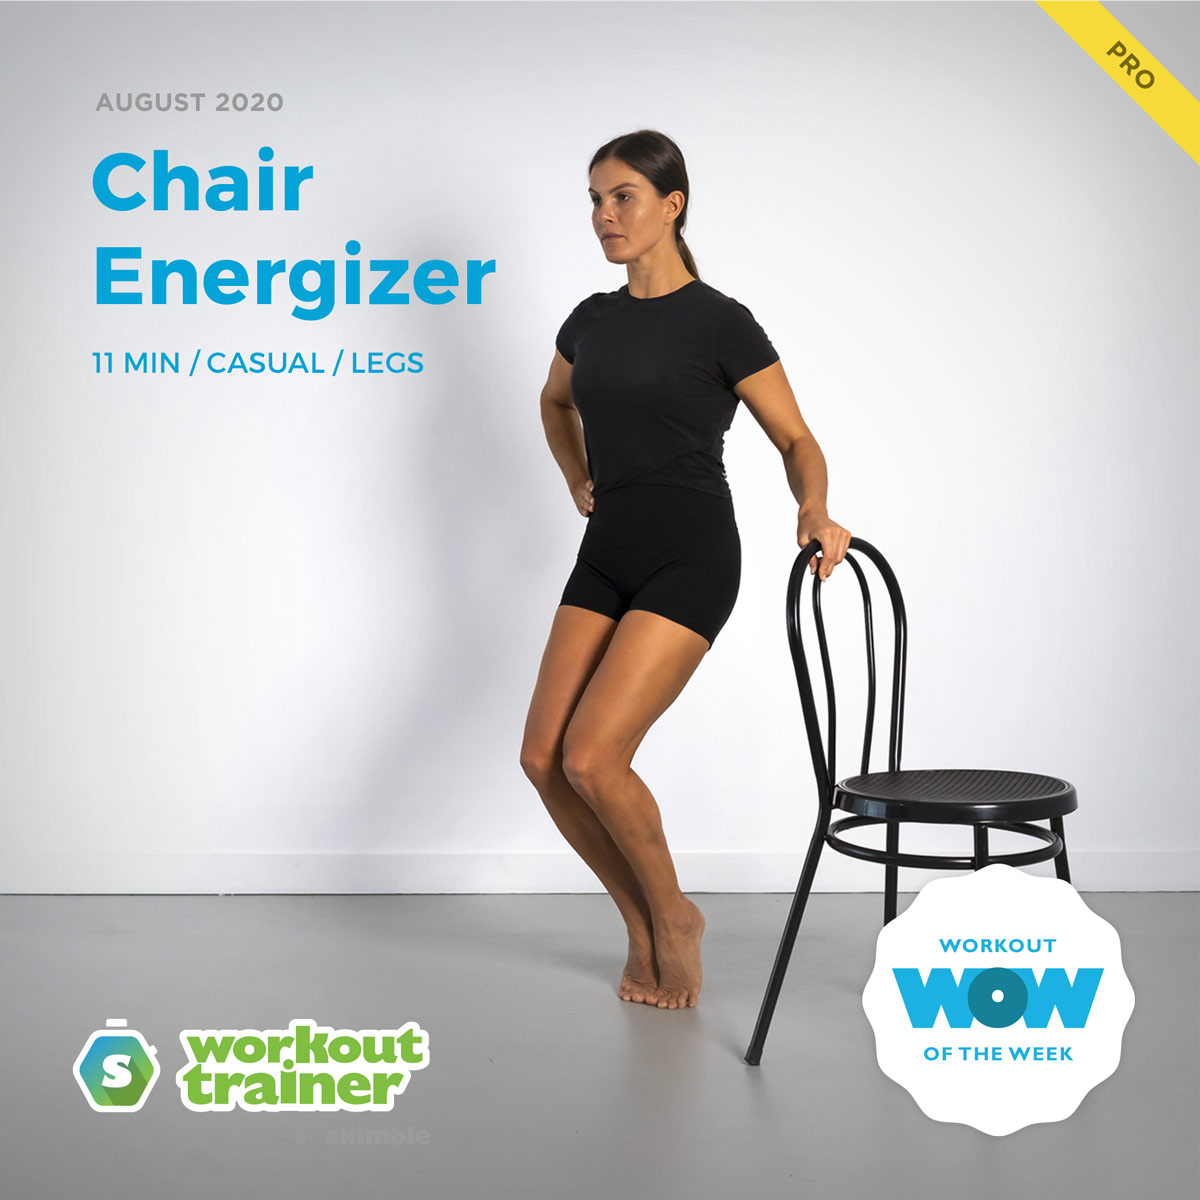 Female Trainer performing High Heel Parallels exercise with help of chair